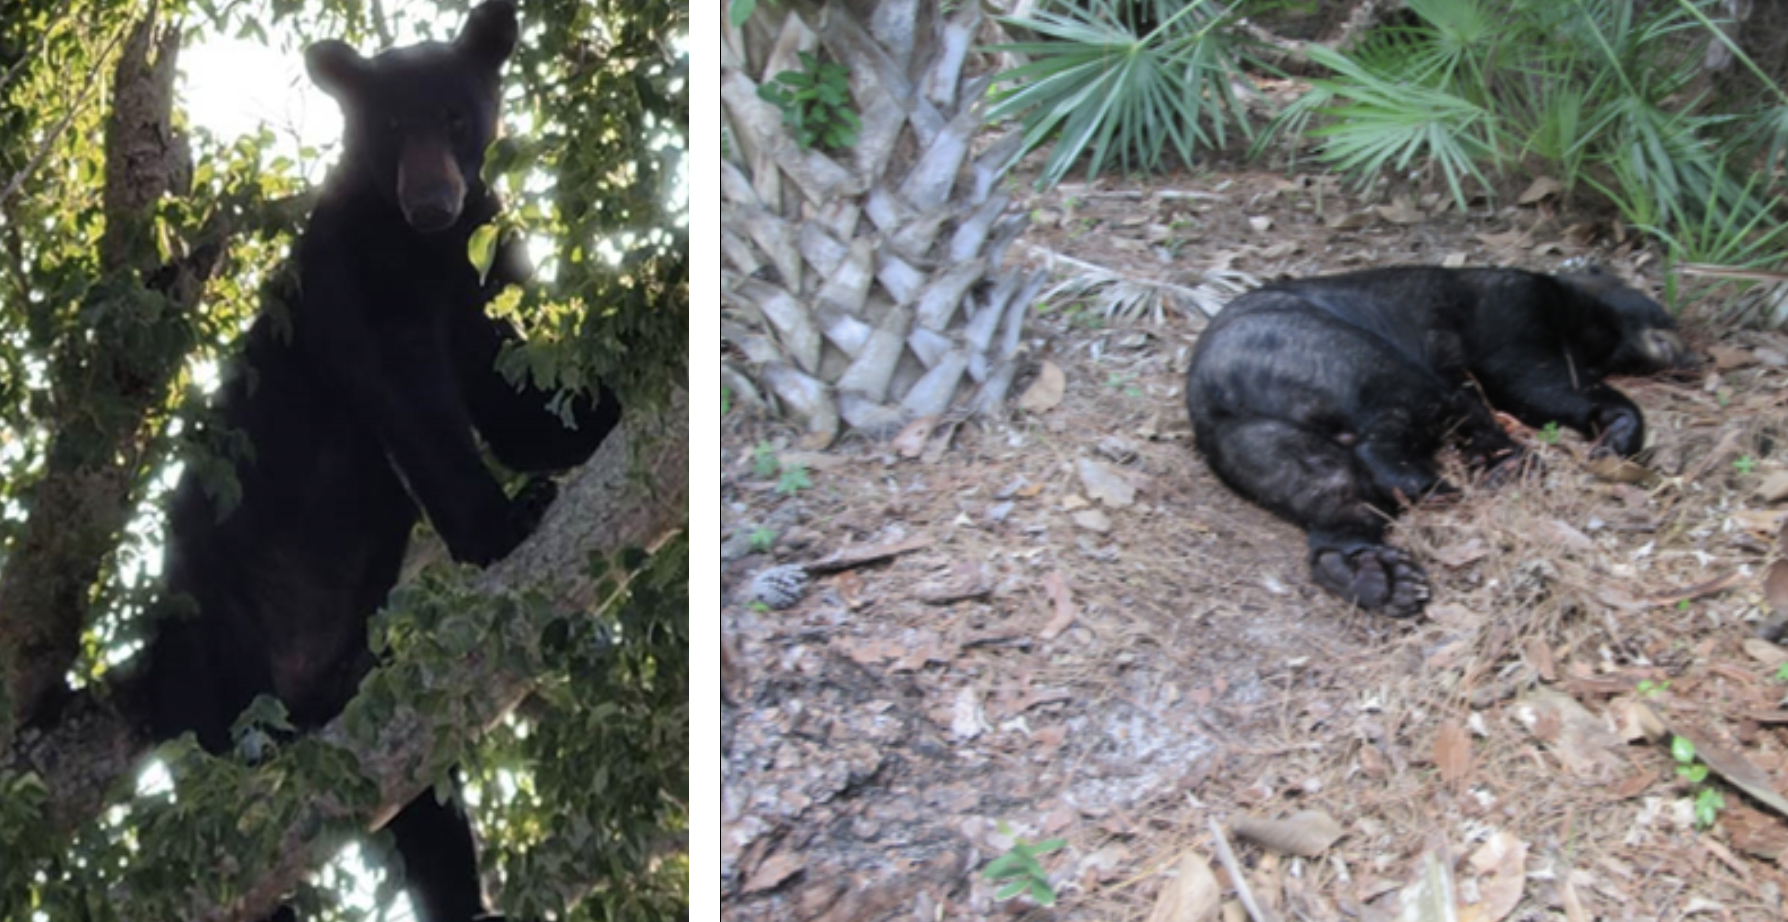 Florida Wildlife Officers Clash with Sheriff’s Deputies for Shooting Black Bear That “Was Never a Safety Hazard”